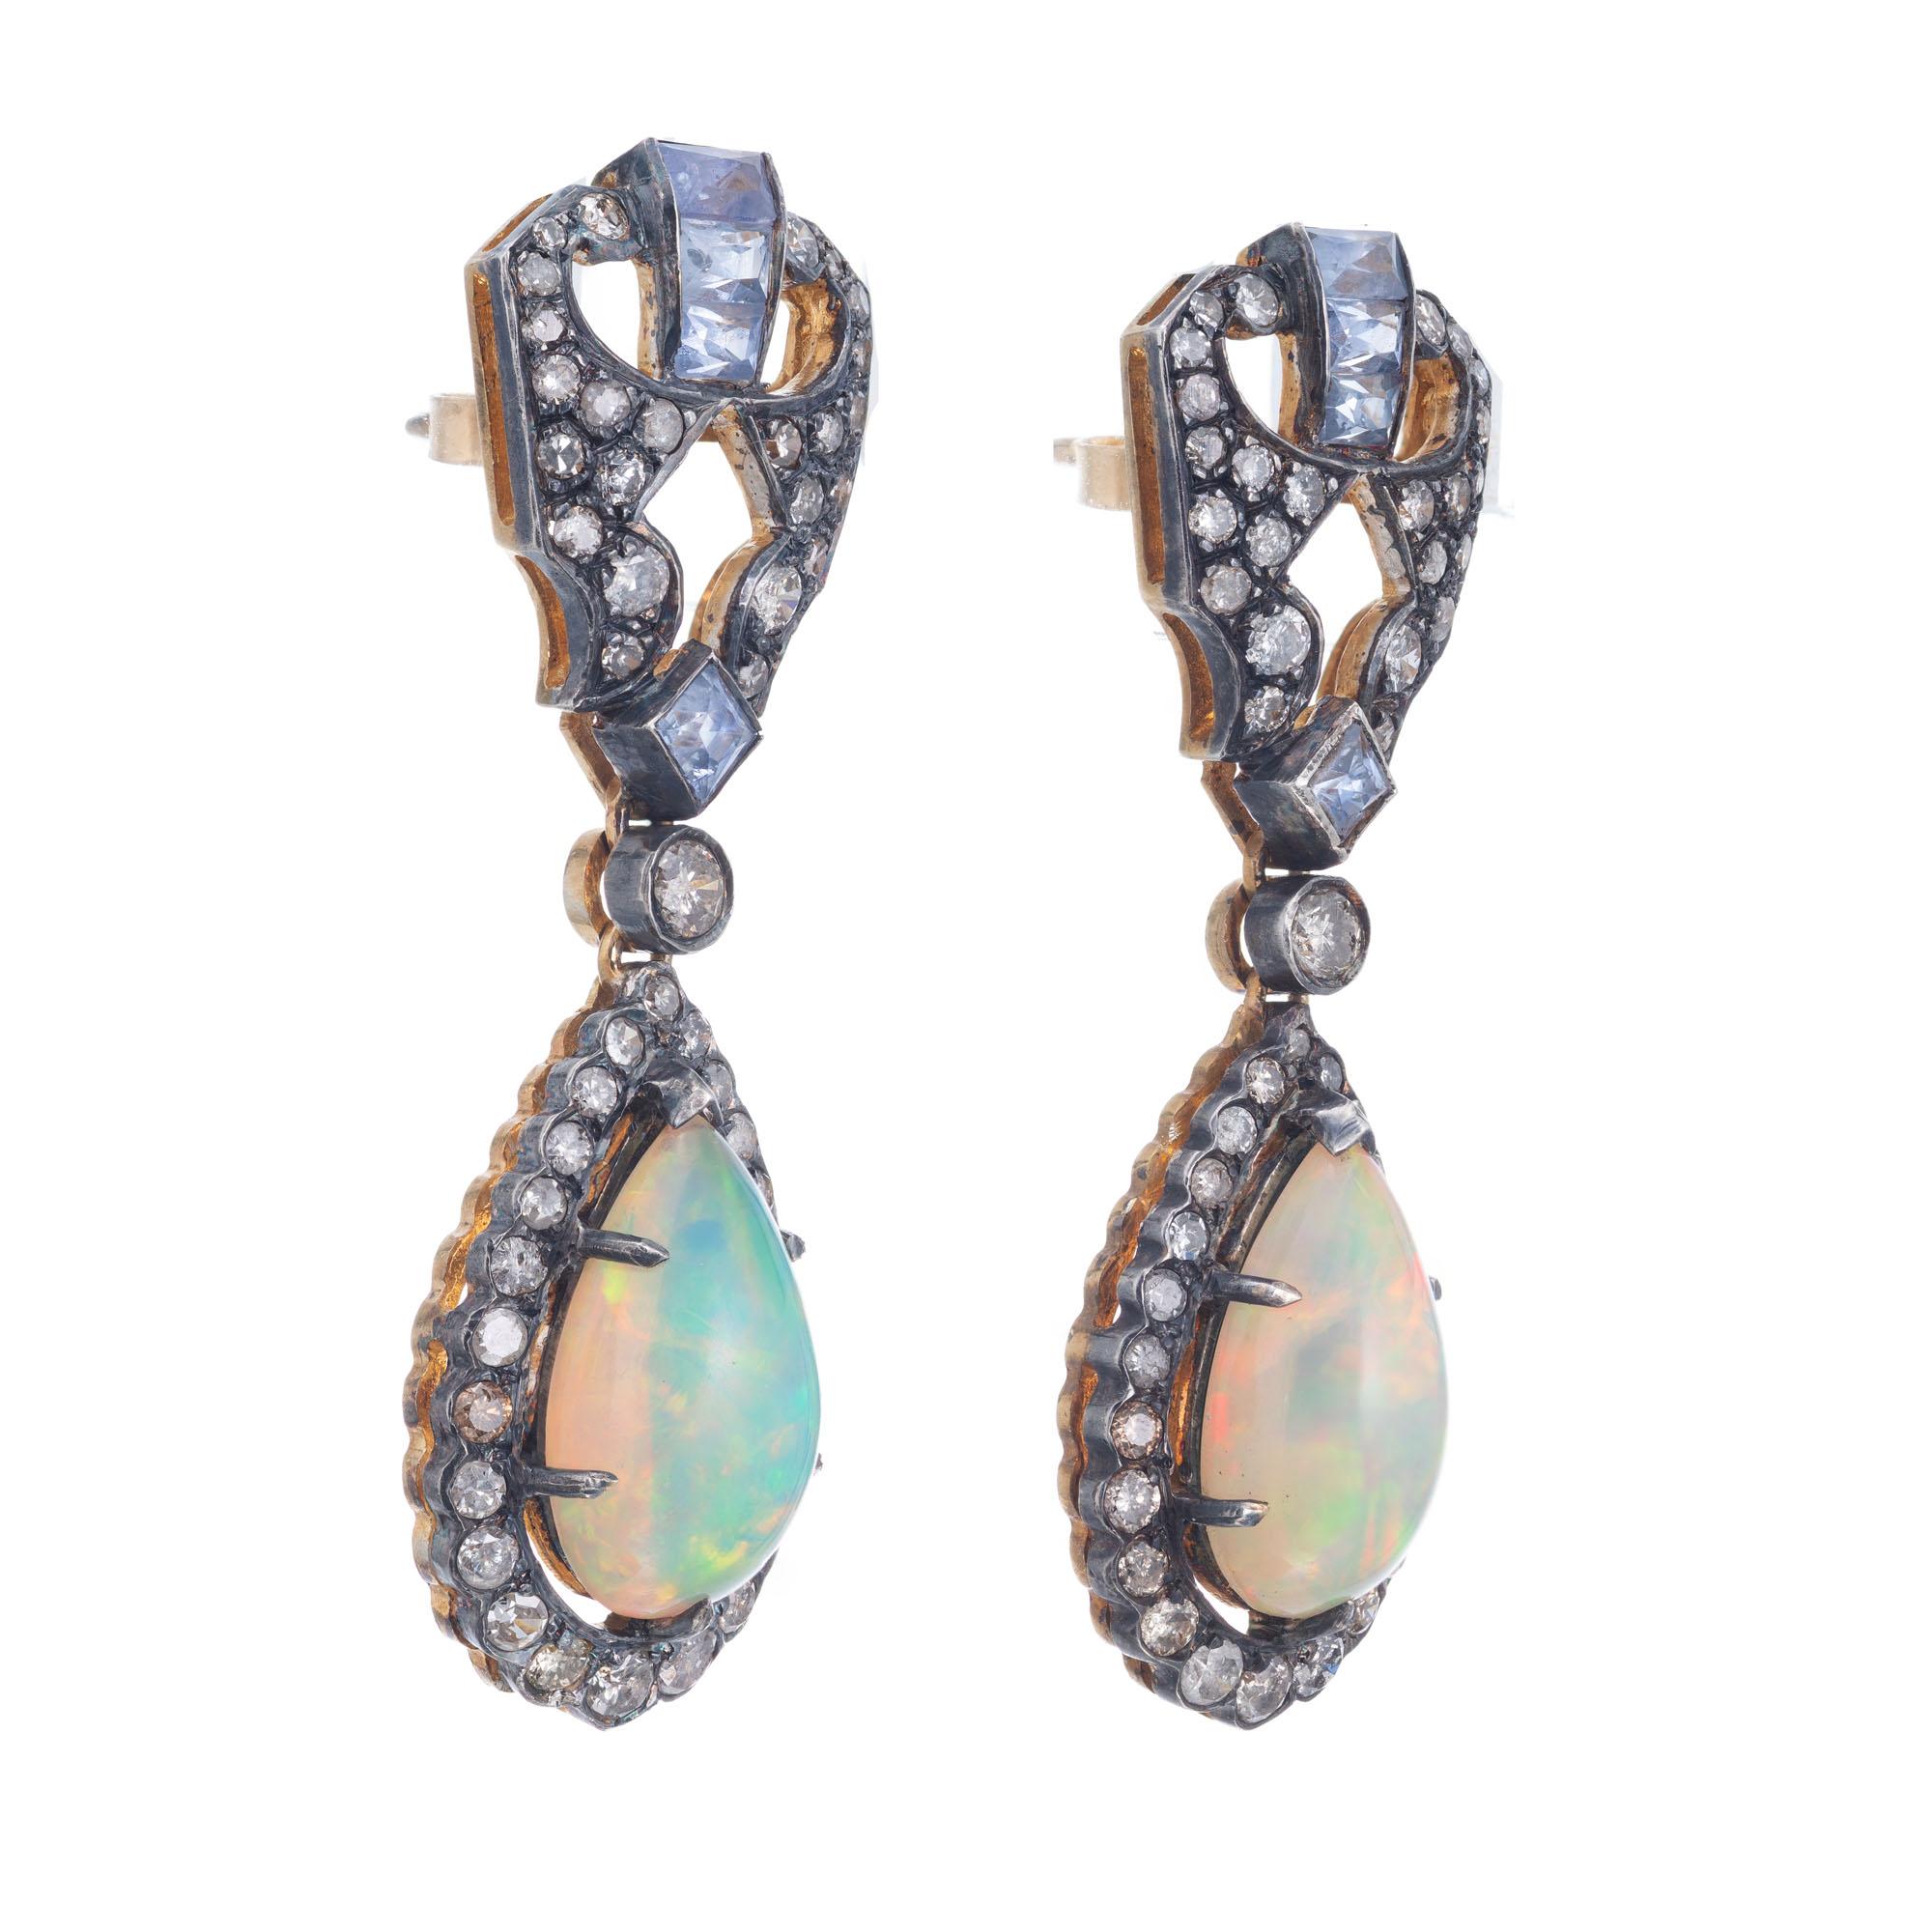 Vintage opal, diamond and sapphire dangle earrings. Pear shaped ovals with halo's of round diamonds set in oxidized silver tops with light blue Ceylon sapphire accents. Gold plated silver back side and 14k gold posts.

98 old round light brown